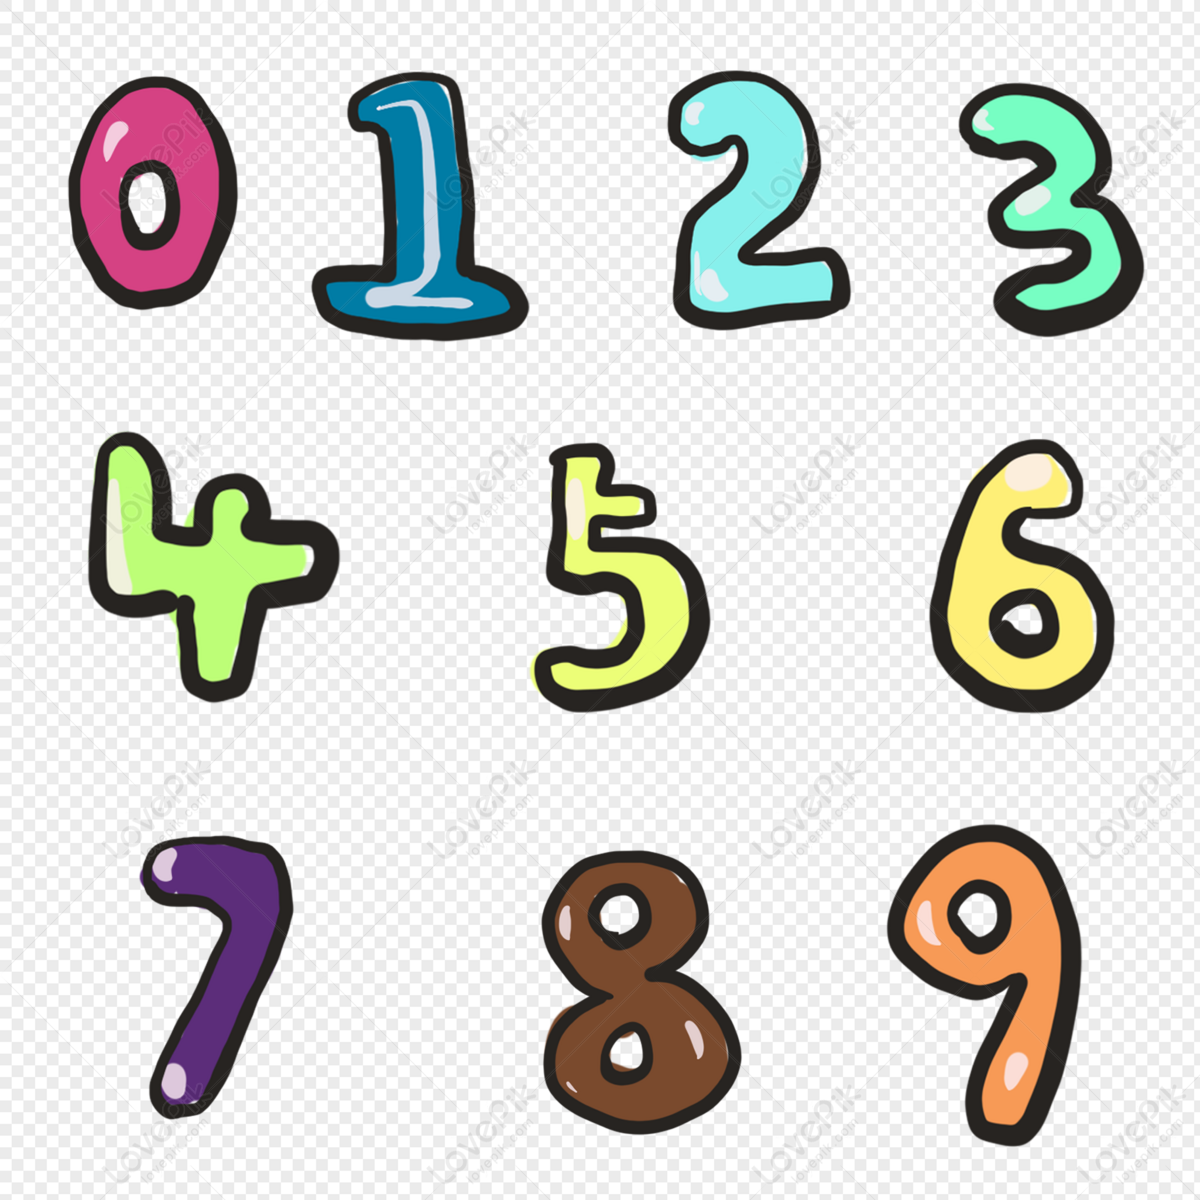 Hand Drawn Numbers PNG Image And Clipart Image For Free Download - Lovepik  | 401485878